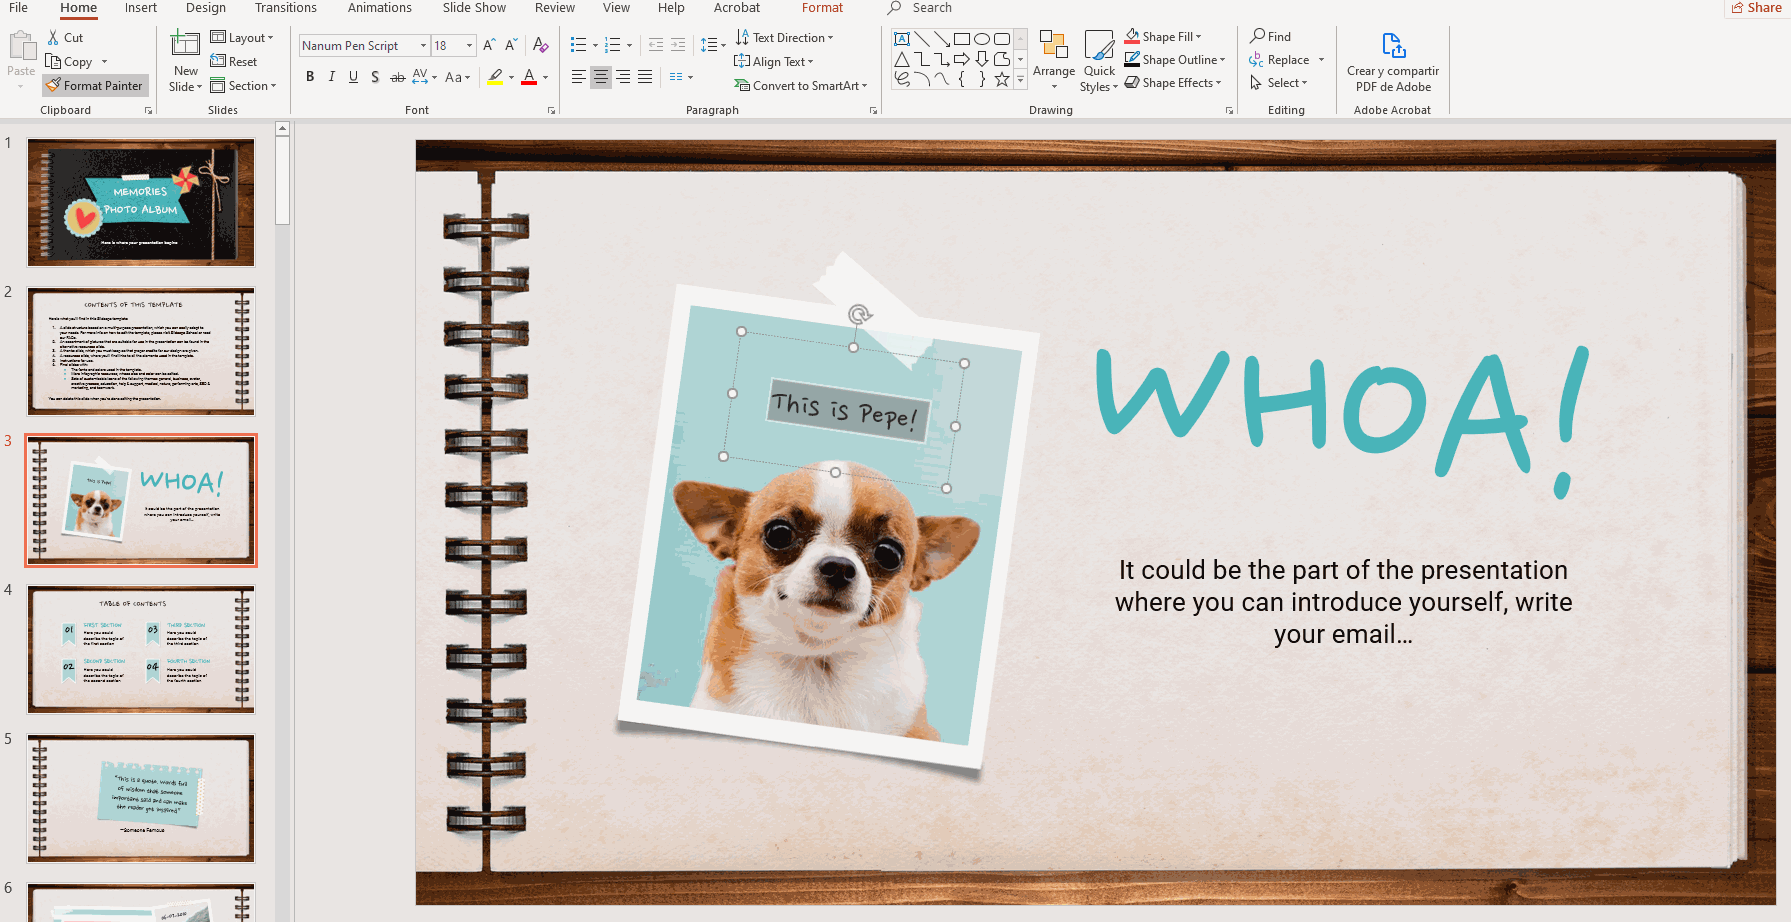 cach lam powerpoint 8